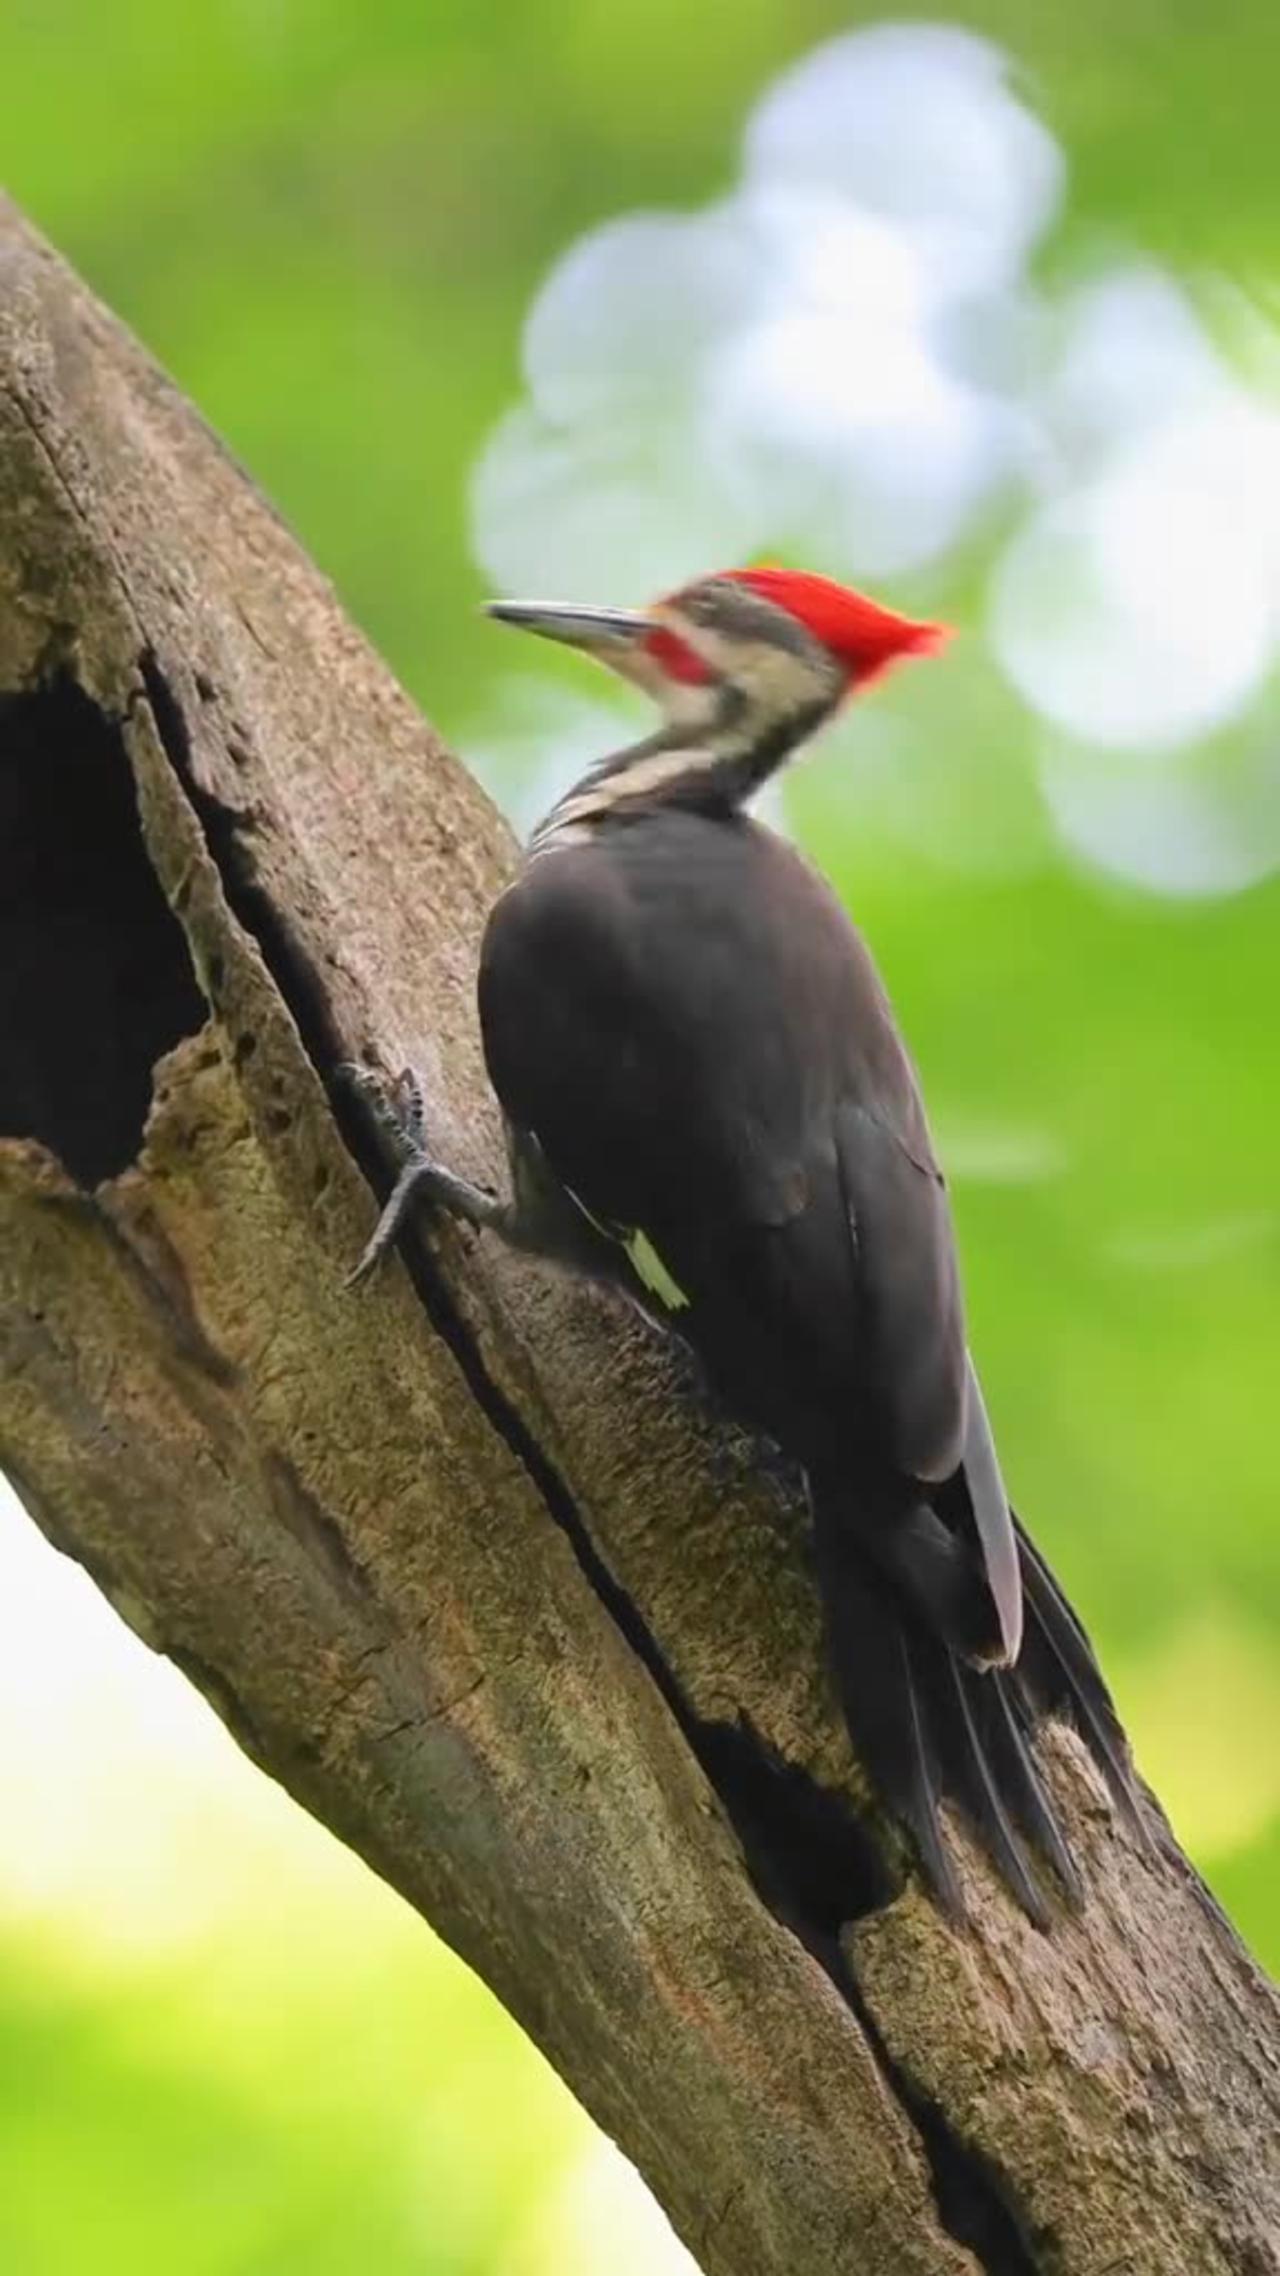 Woodpecker at the nature